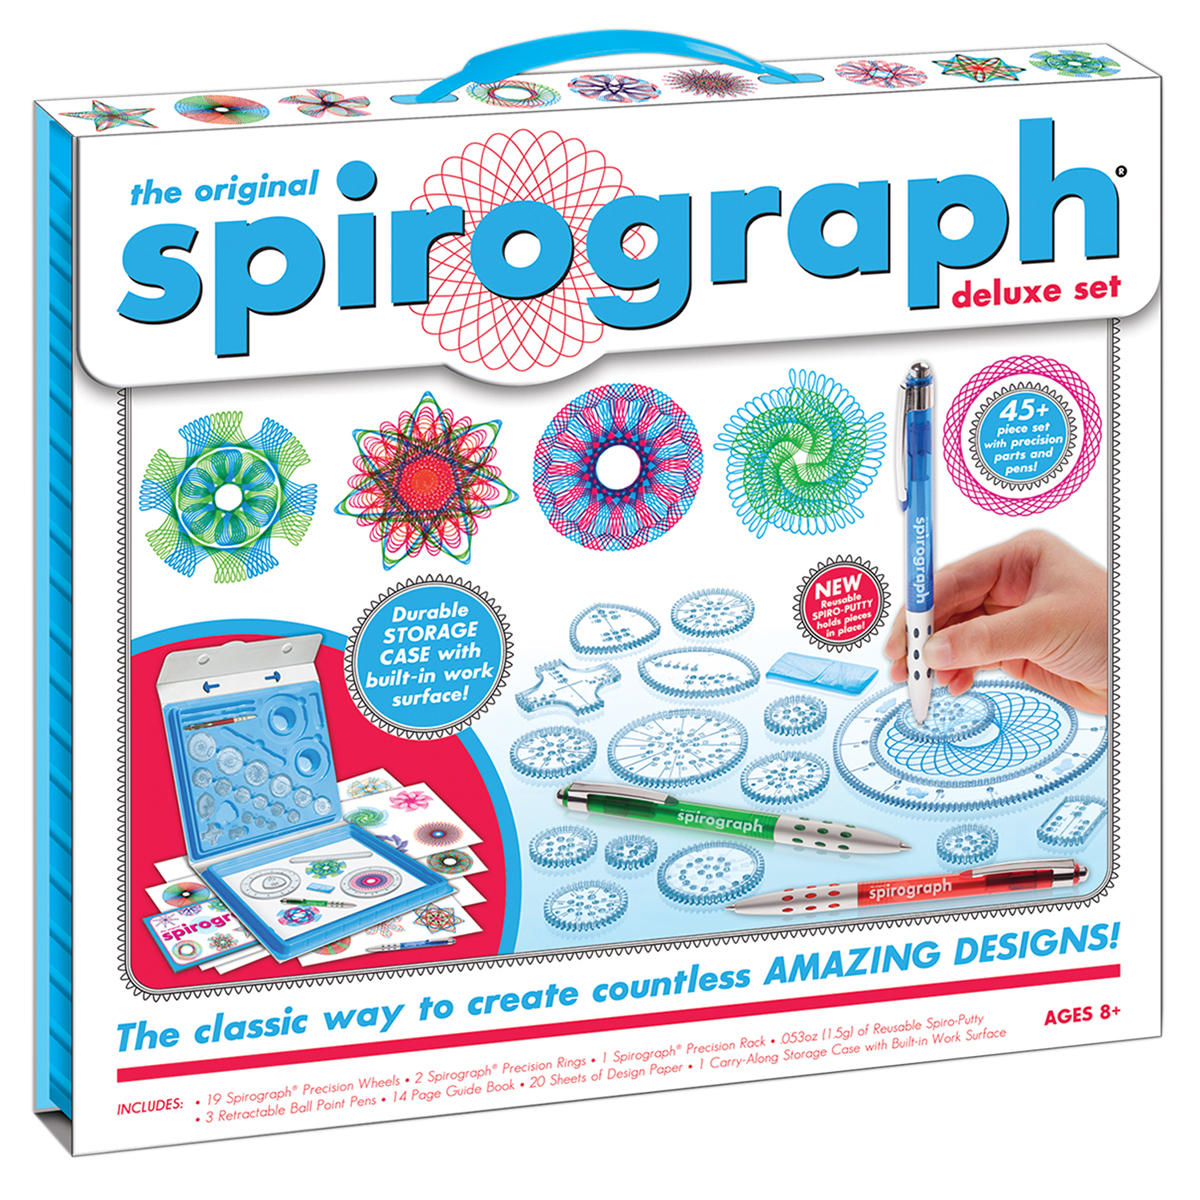 Spirograph Deluxe Set - image 1 of 2